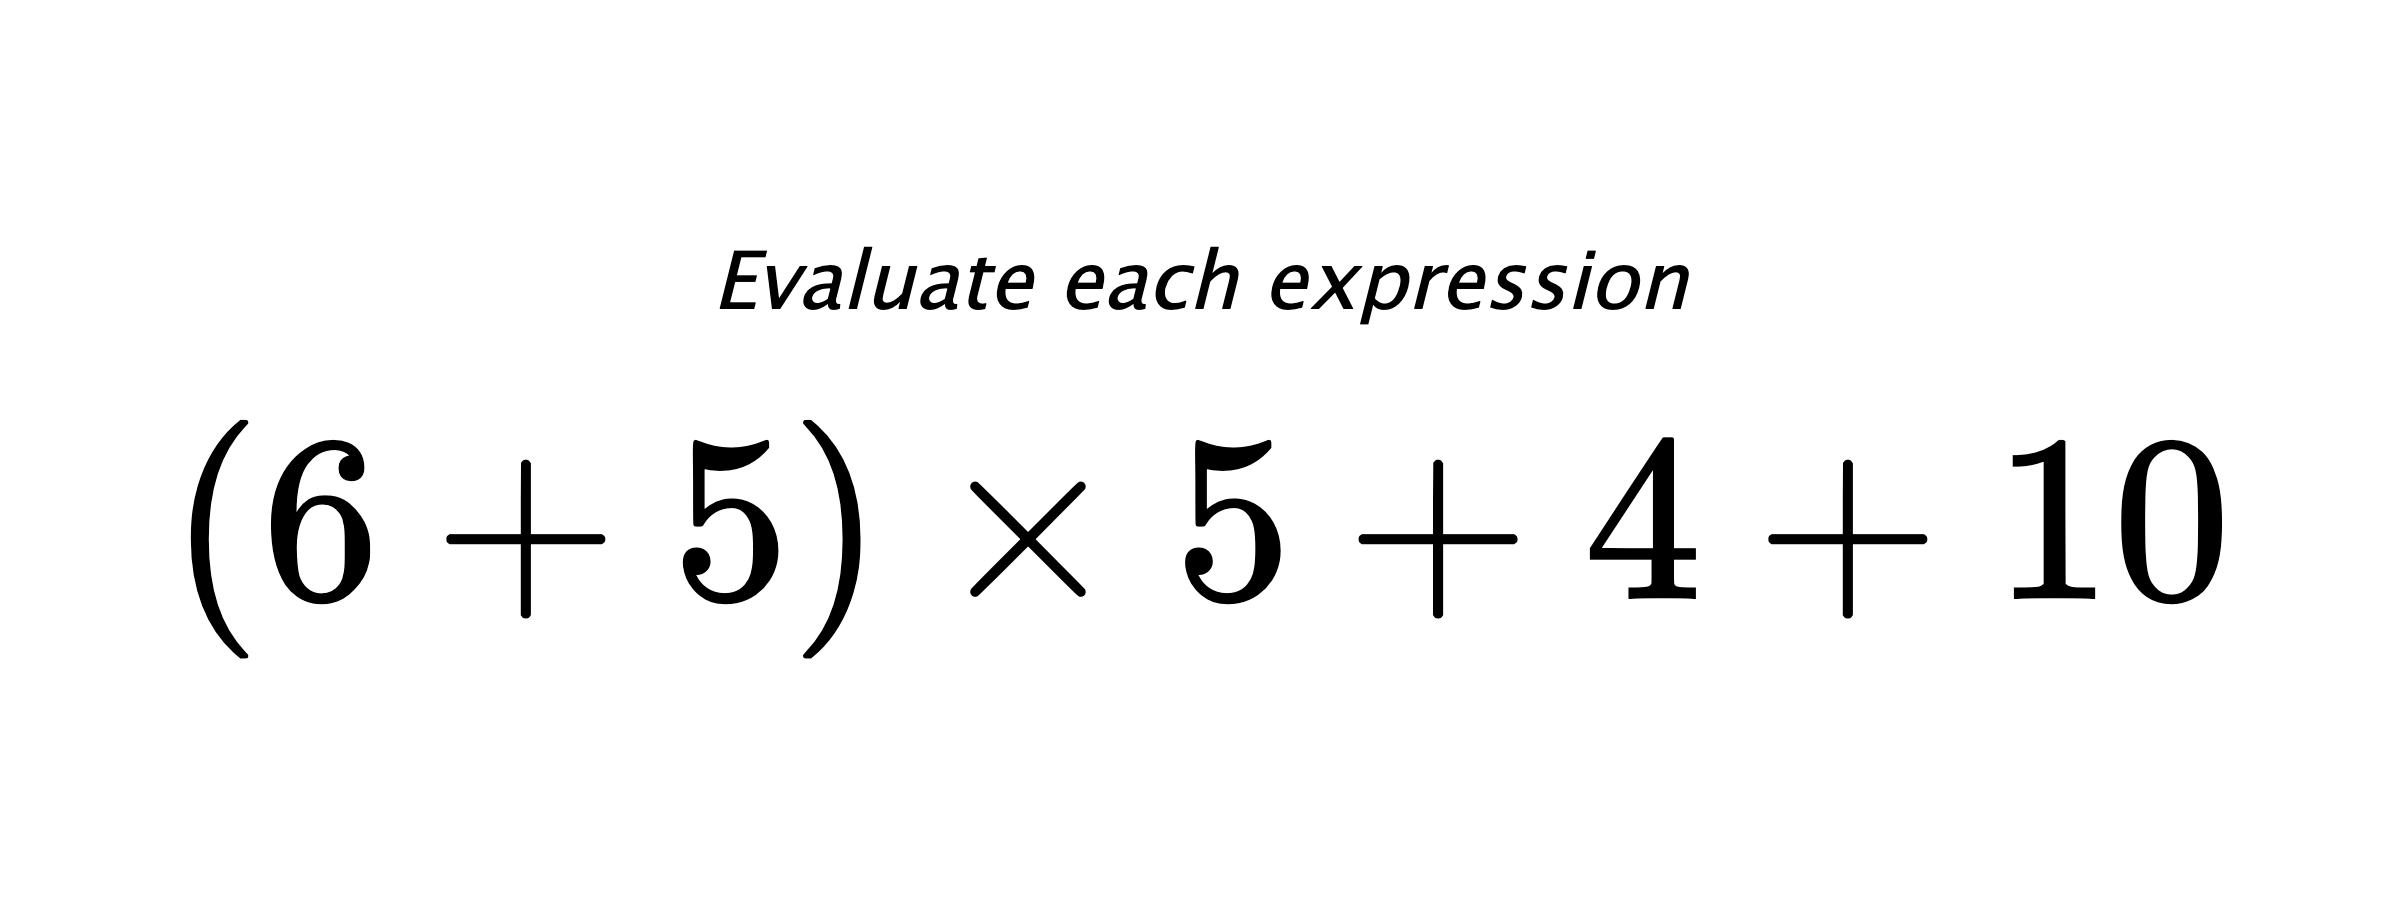 Evaluate each expression $ (6+5) \times 5 + 4 + 10 $